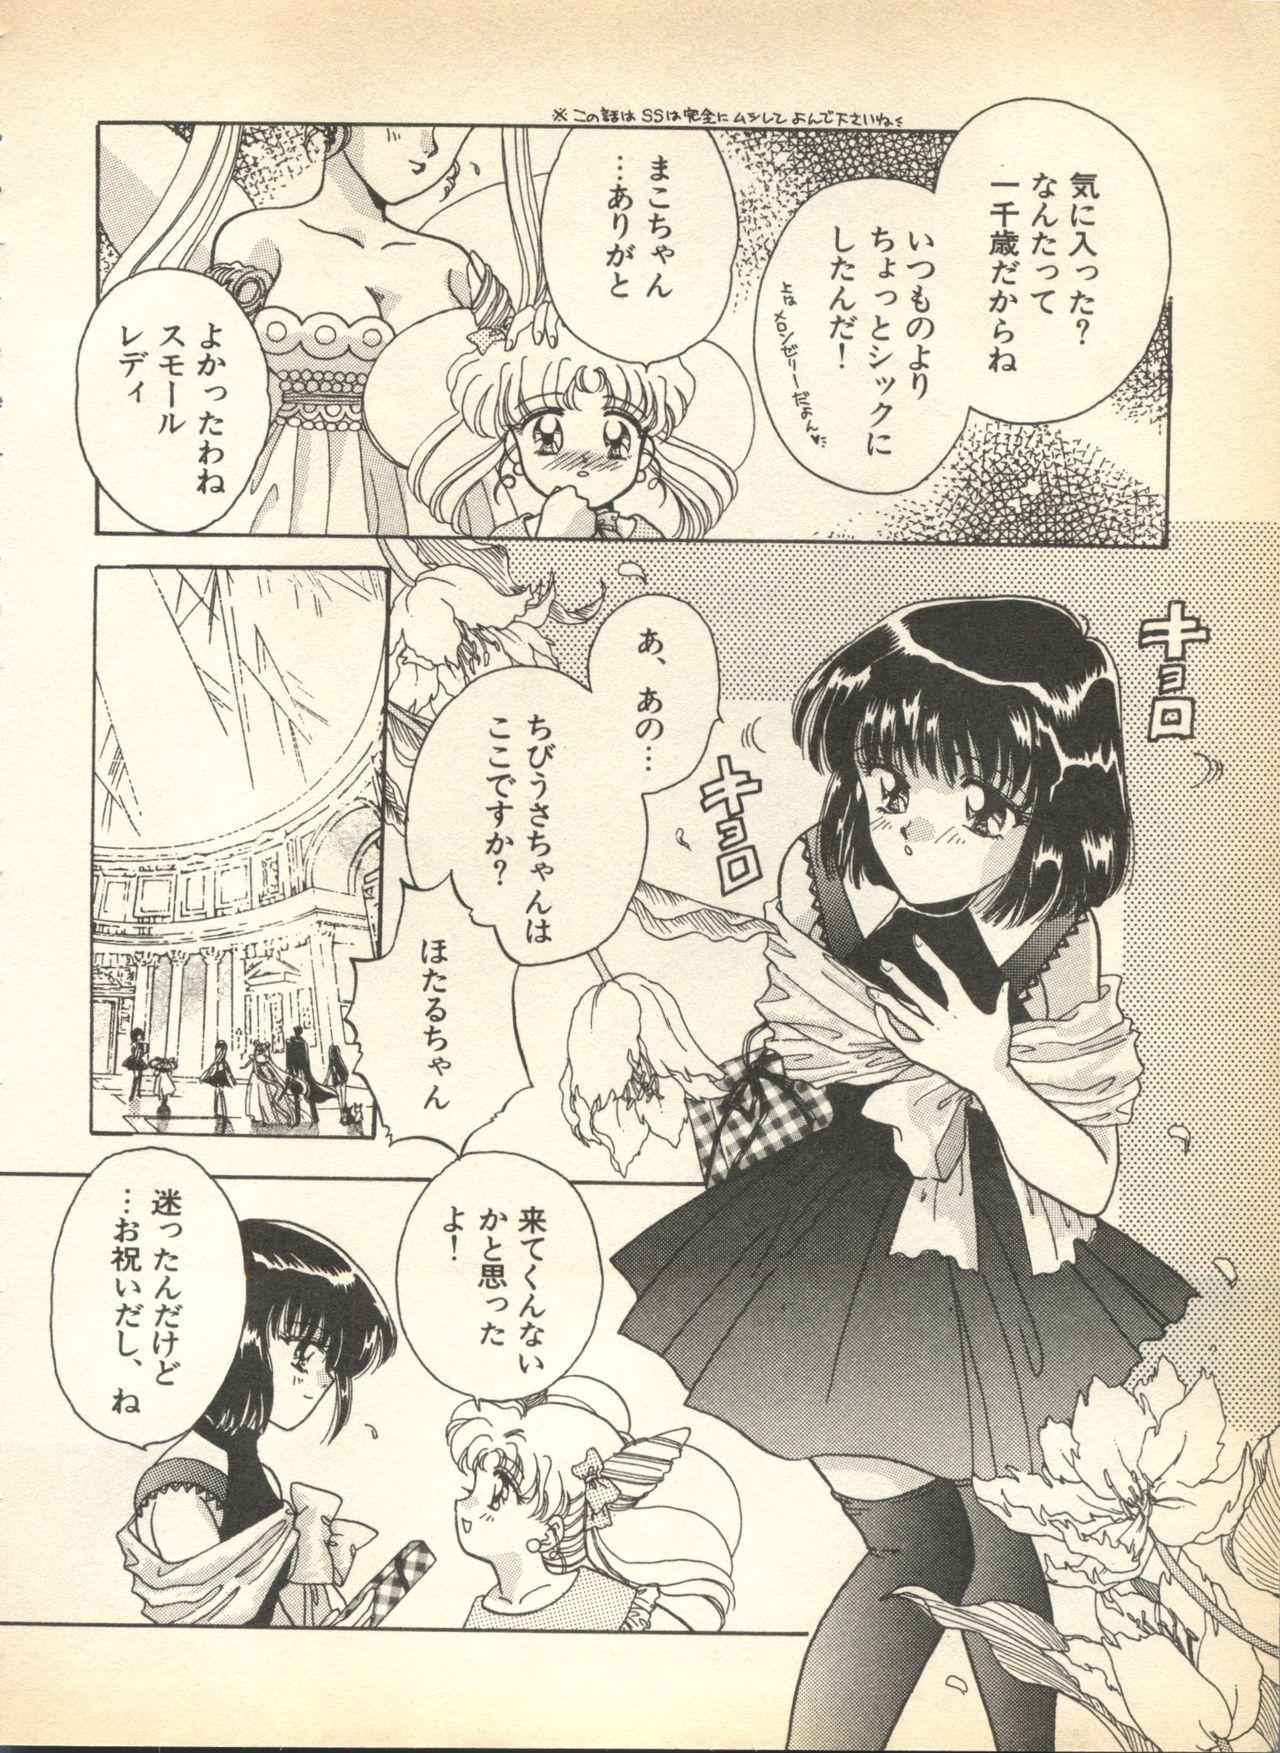 Exhib Lunatic Party 8 - Sailor moon Chastity - Page 8